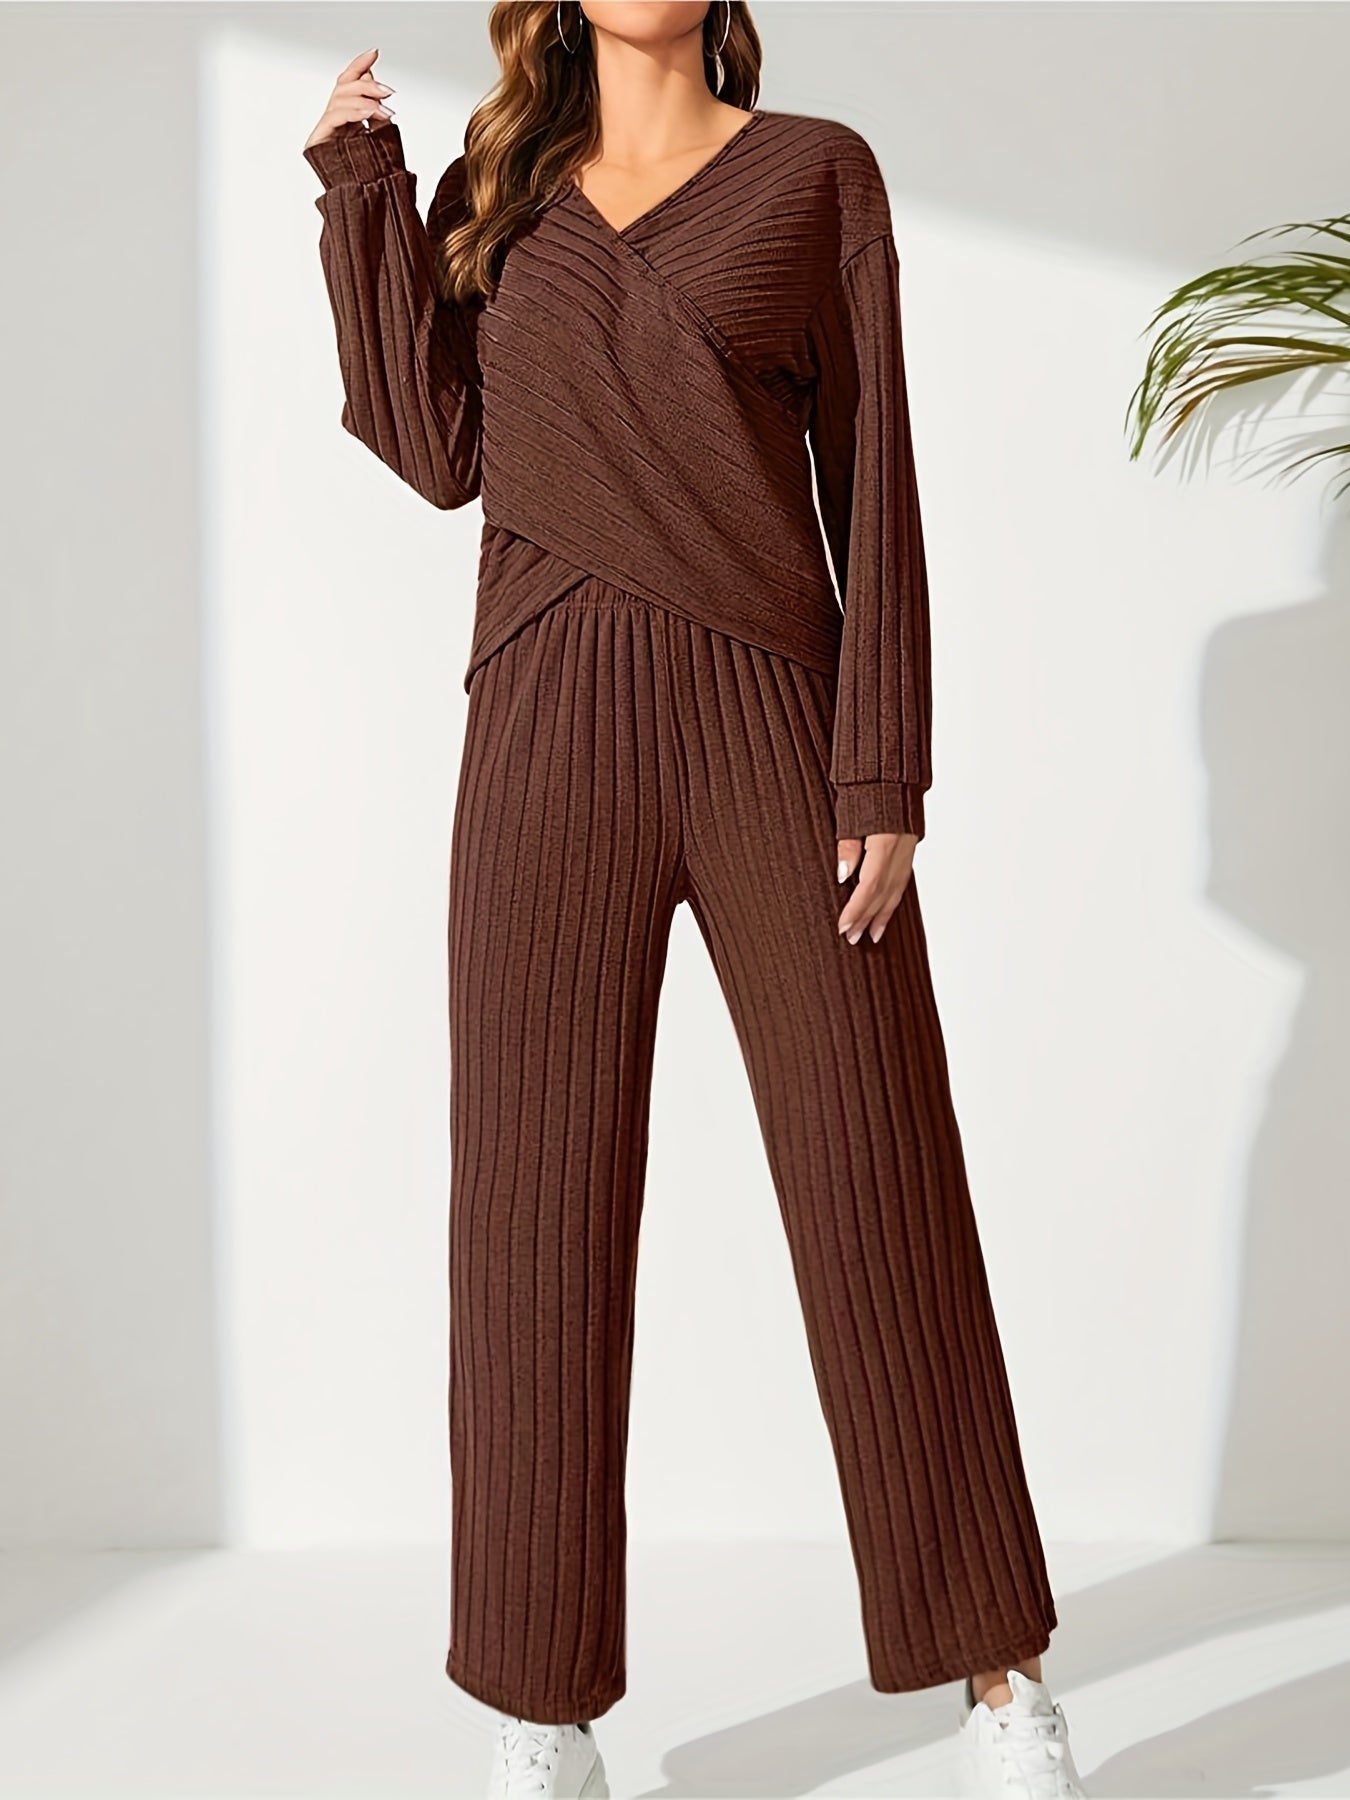 JENNIE Solid Rib Knit Two-piece Set, Casual Cross Front Long Sleeve Top & Slim Pants